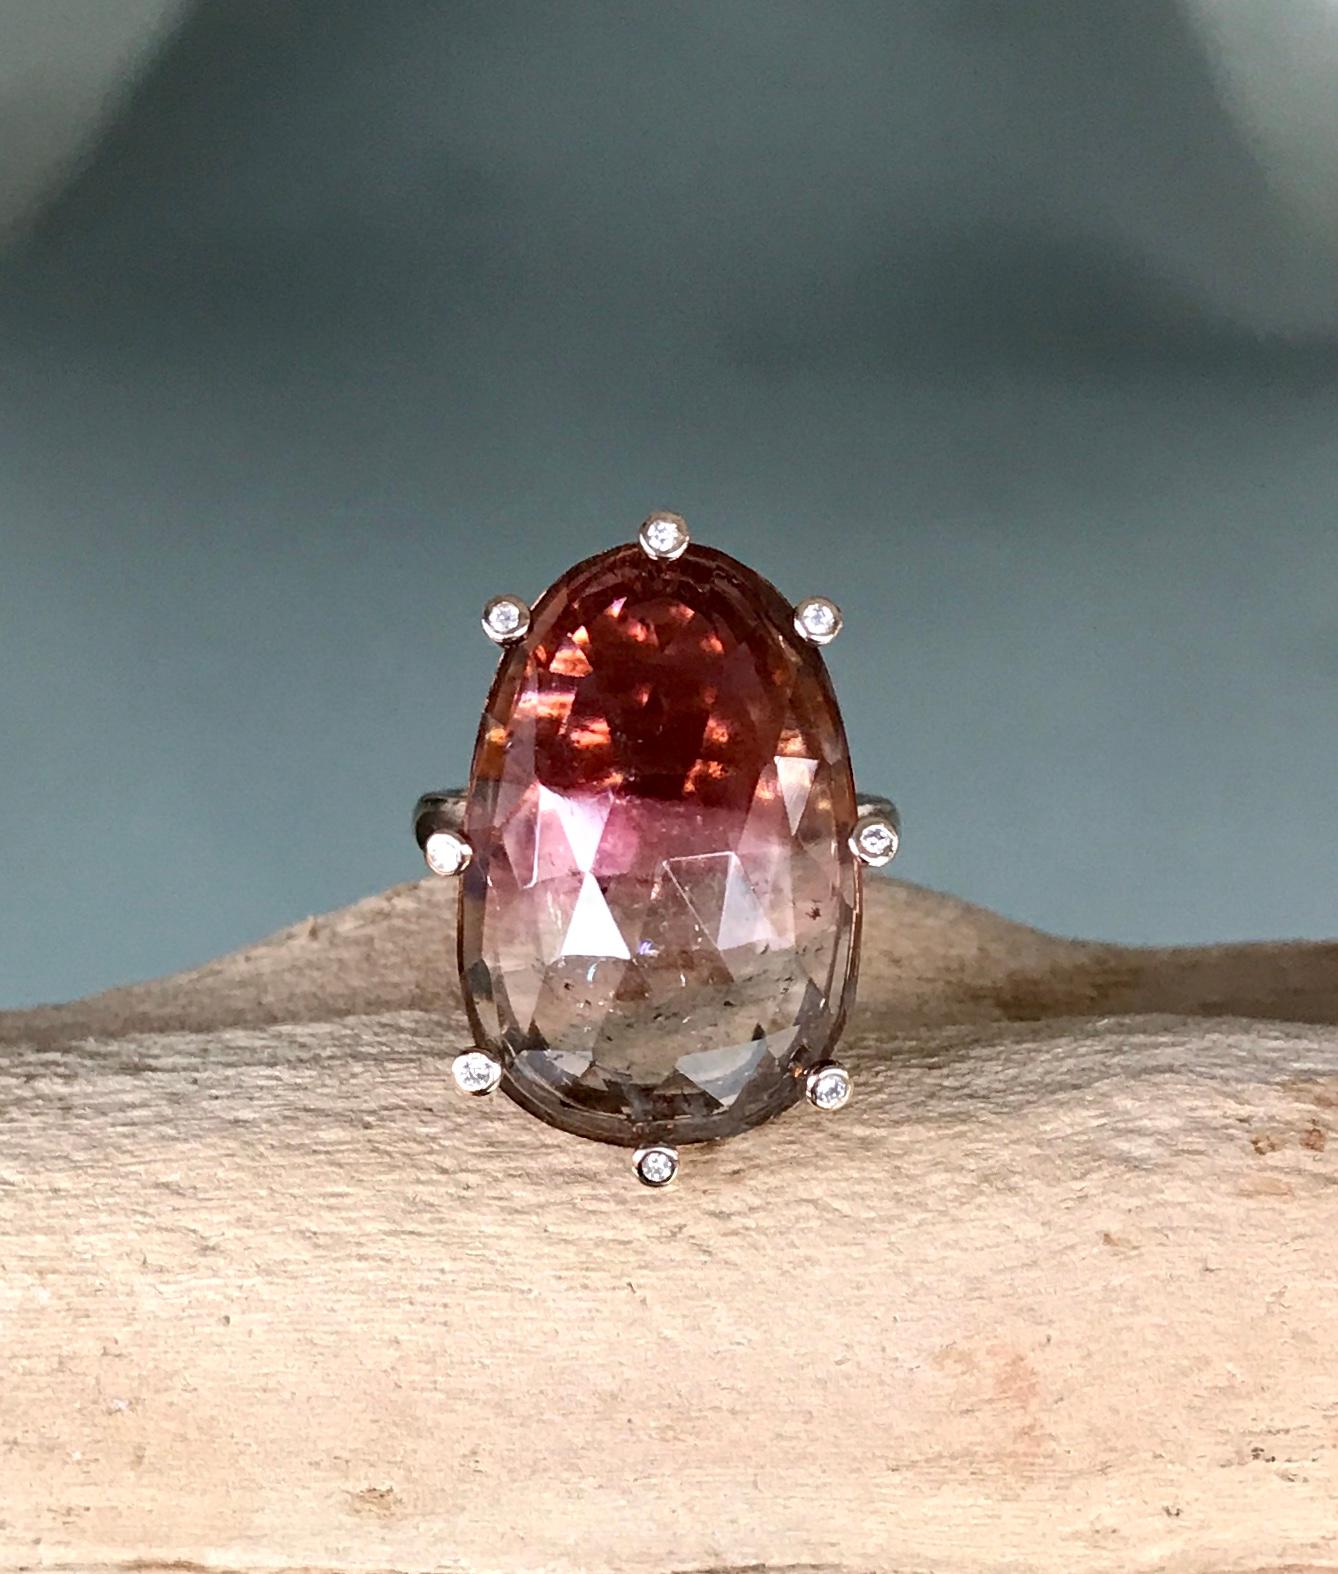 A rose-cut bicolor tourmaline solitaire cocktail ring highlighted with white diamond accents, handcrafted in 18 karat matte rose gold. US size 6.15.

This subtly beautiful one-of-a-kind bicolor ring radiates brilliant sparks of fire from within when